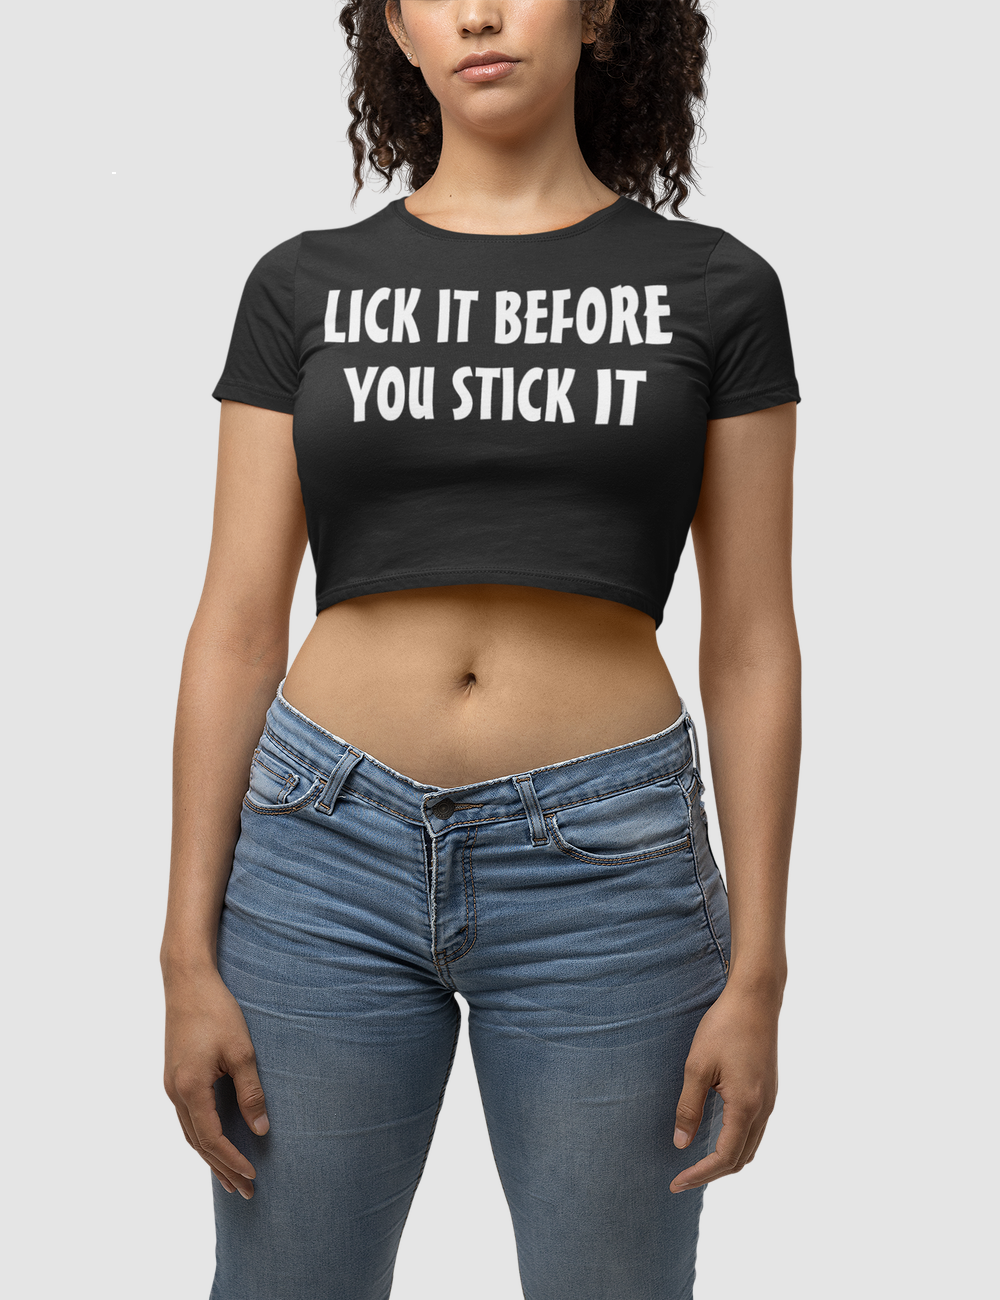 Lick It Before You Stick It Women's Fitted Crop Top T-Shirt OniTakai